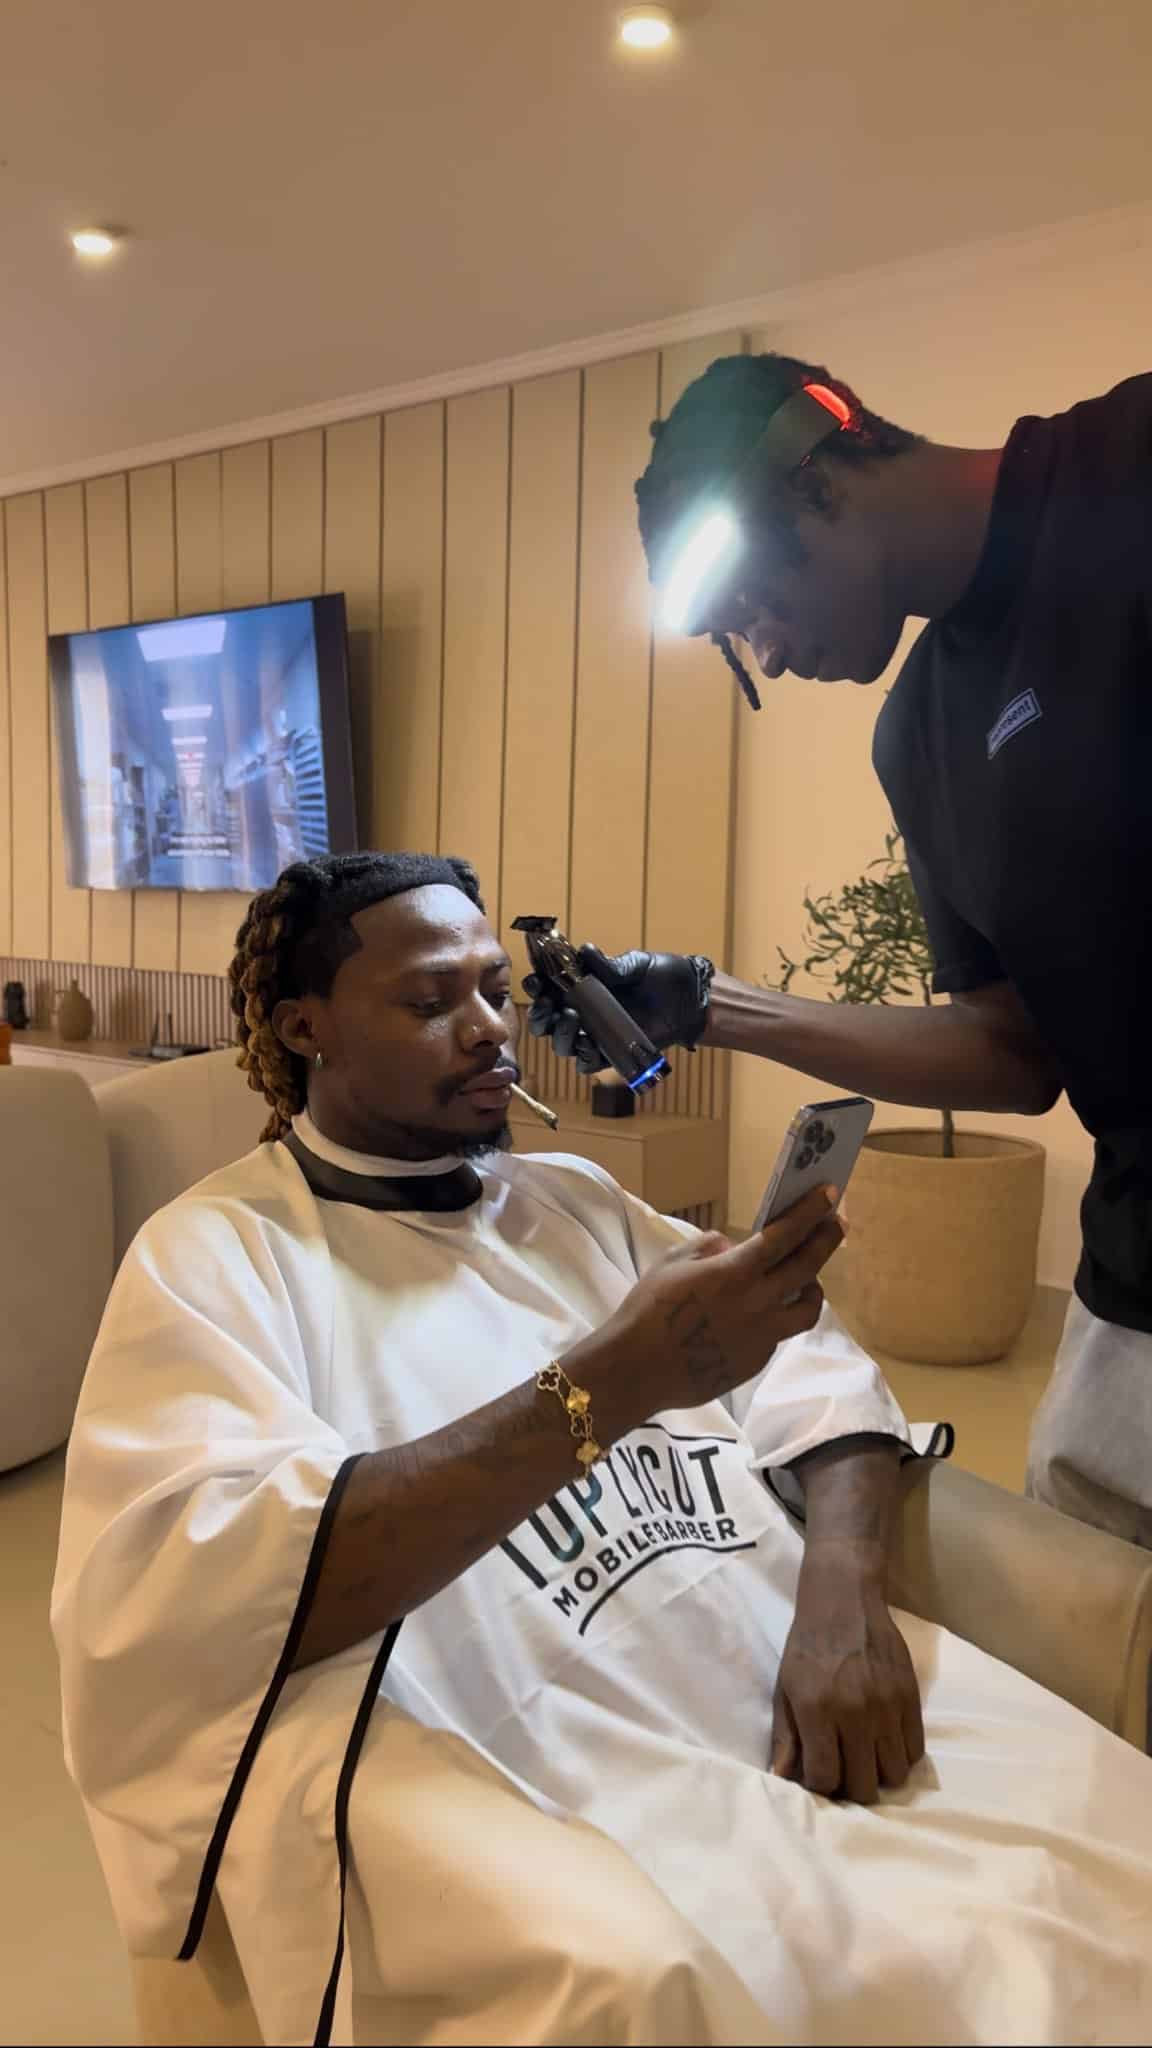 Young man who went viral in 2020 for his creative designs on customers turns celebrity barber